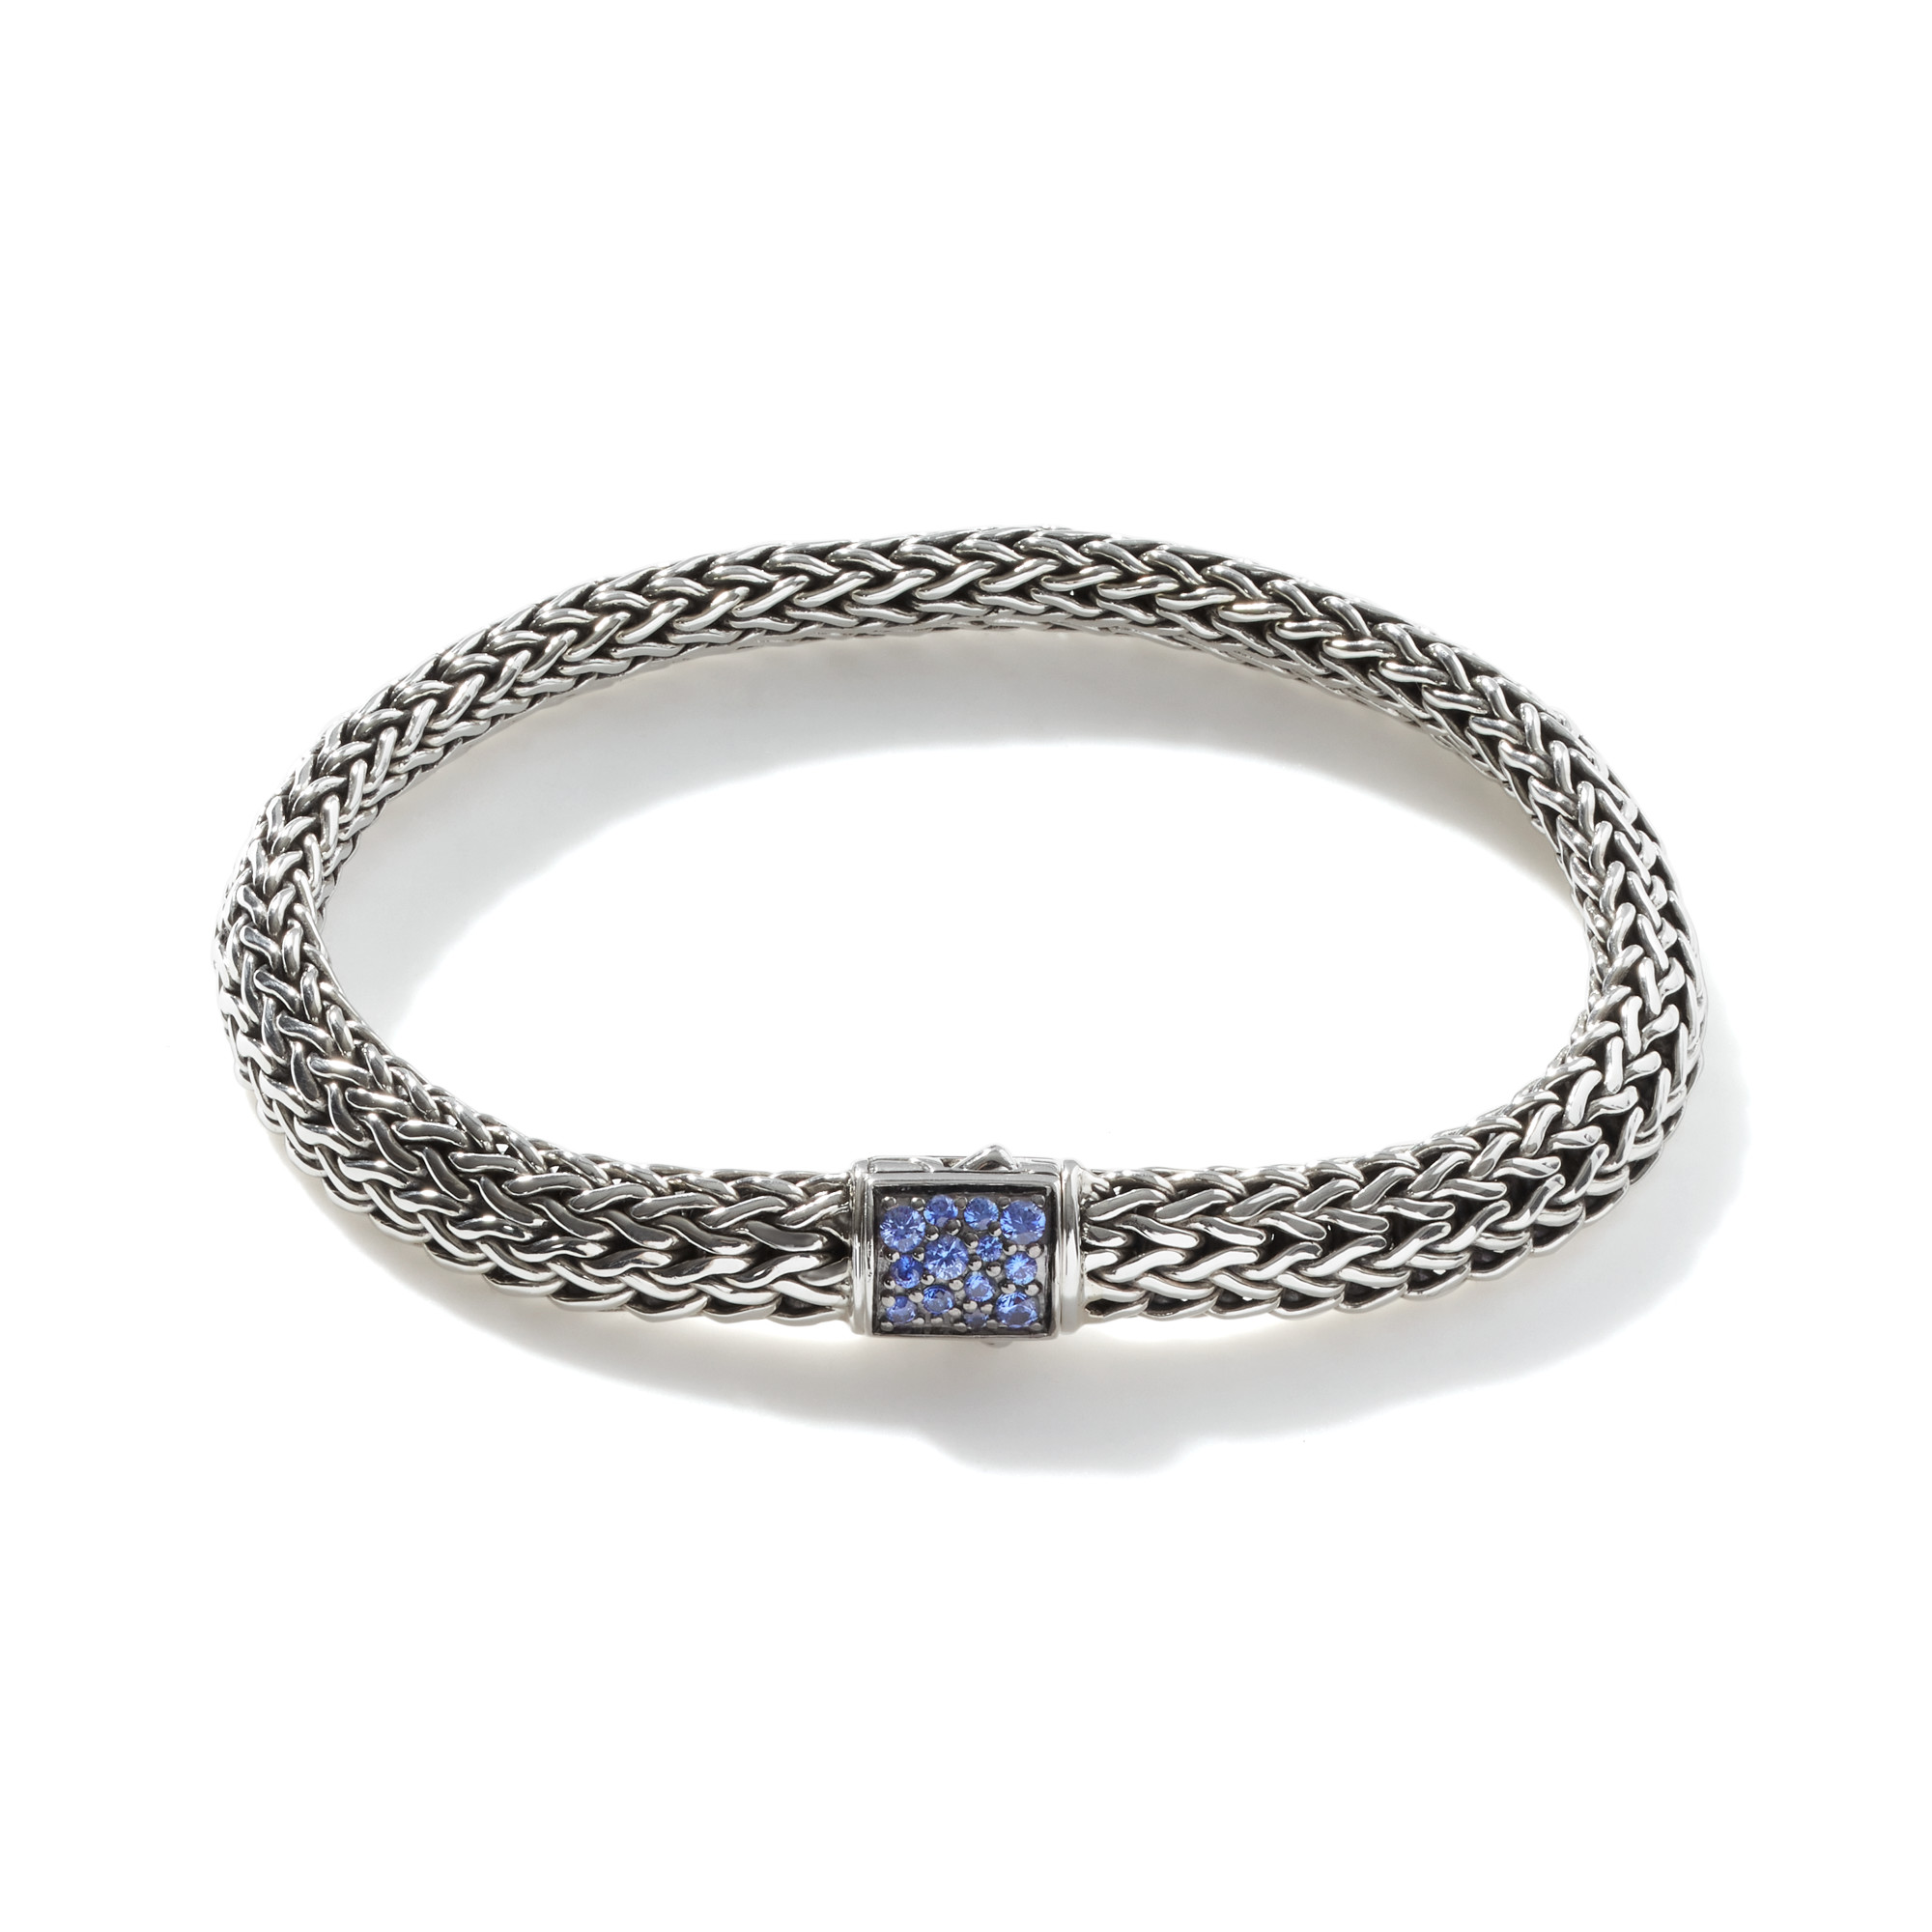 This bracelet by John Hardy is crafted from sterling silver and features black and blue sapphires in the clasp.